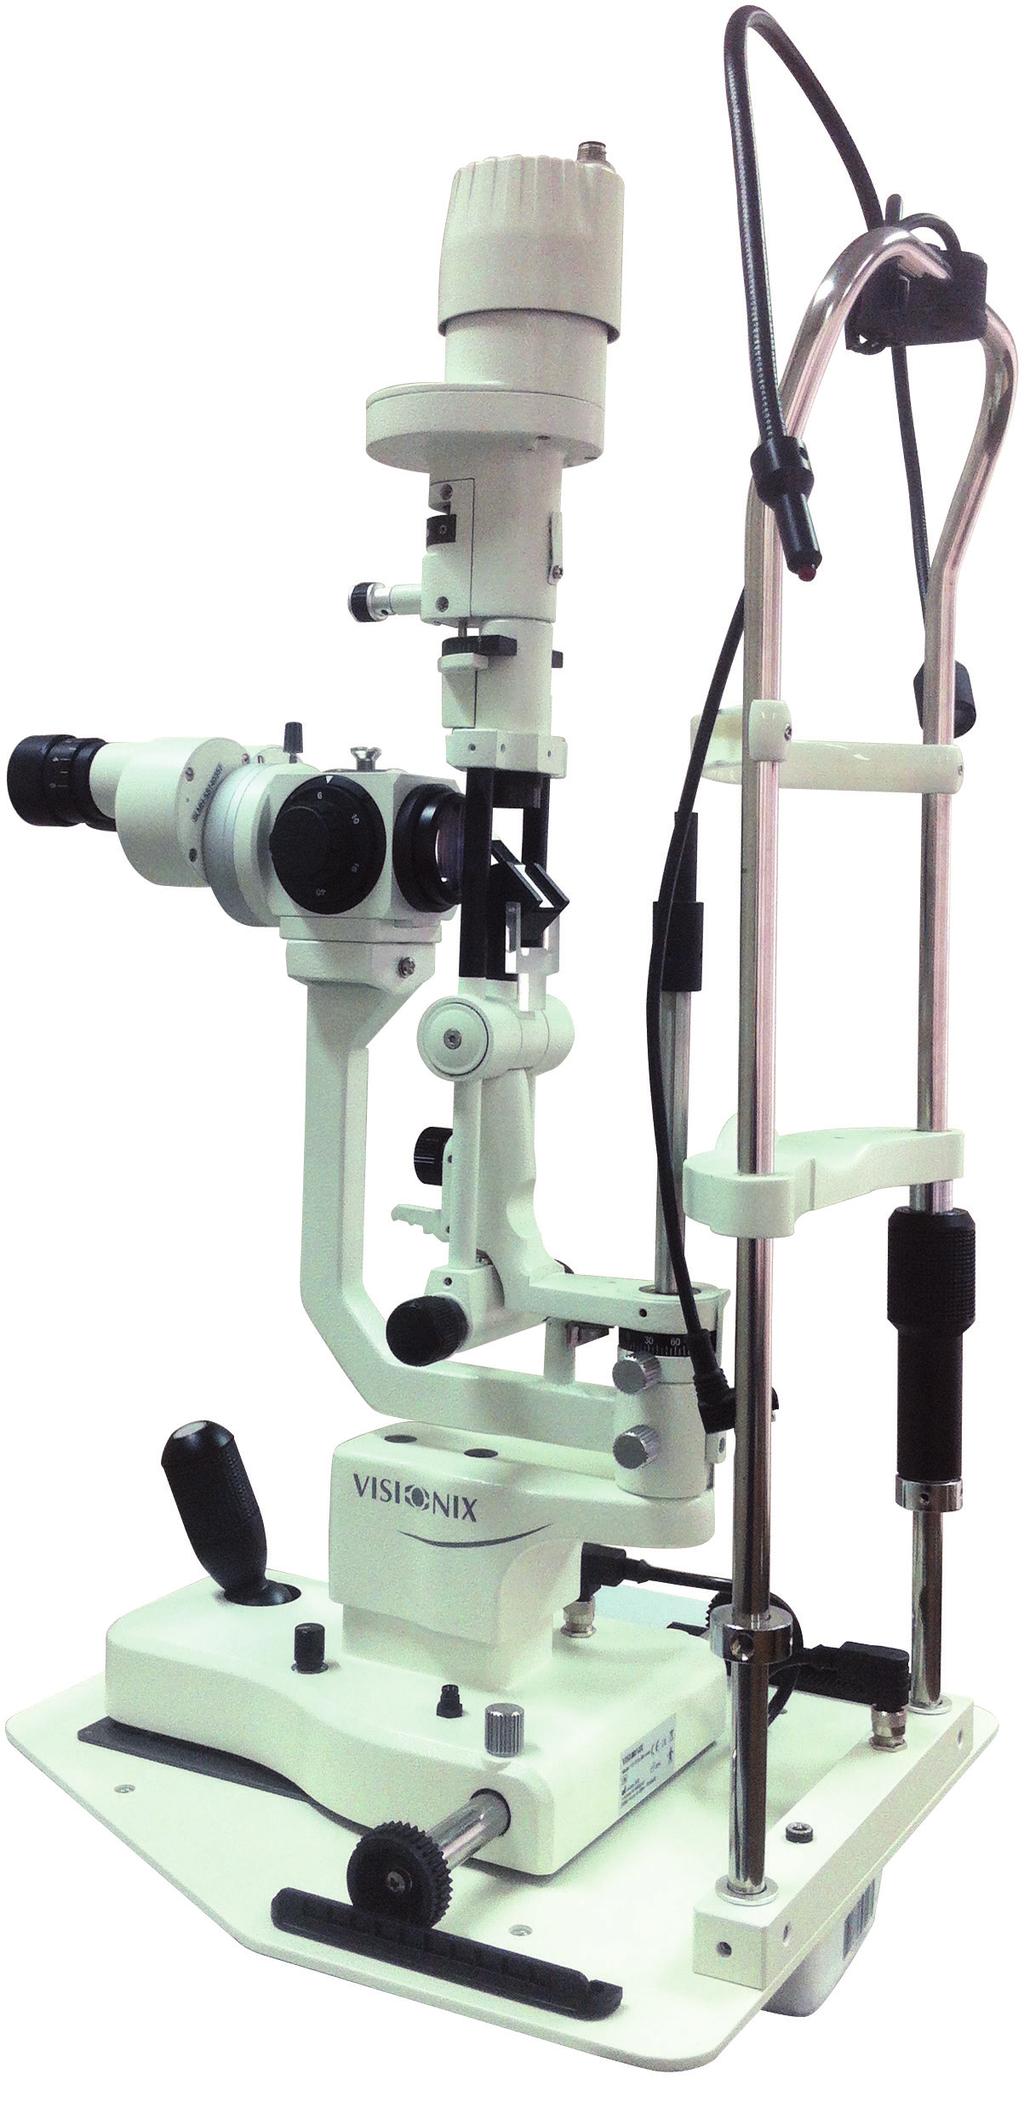 VX70 Slit Lamps Stereo Microscope Converging 6-5 magnifications REF. 8470-0001-05 Converging 6-3 magnifications REF. 8470-0001-03 Converging 6-2 magnifications REF.